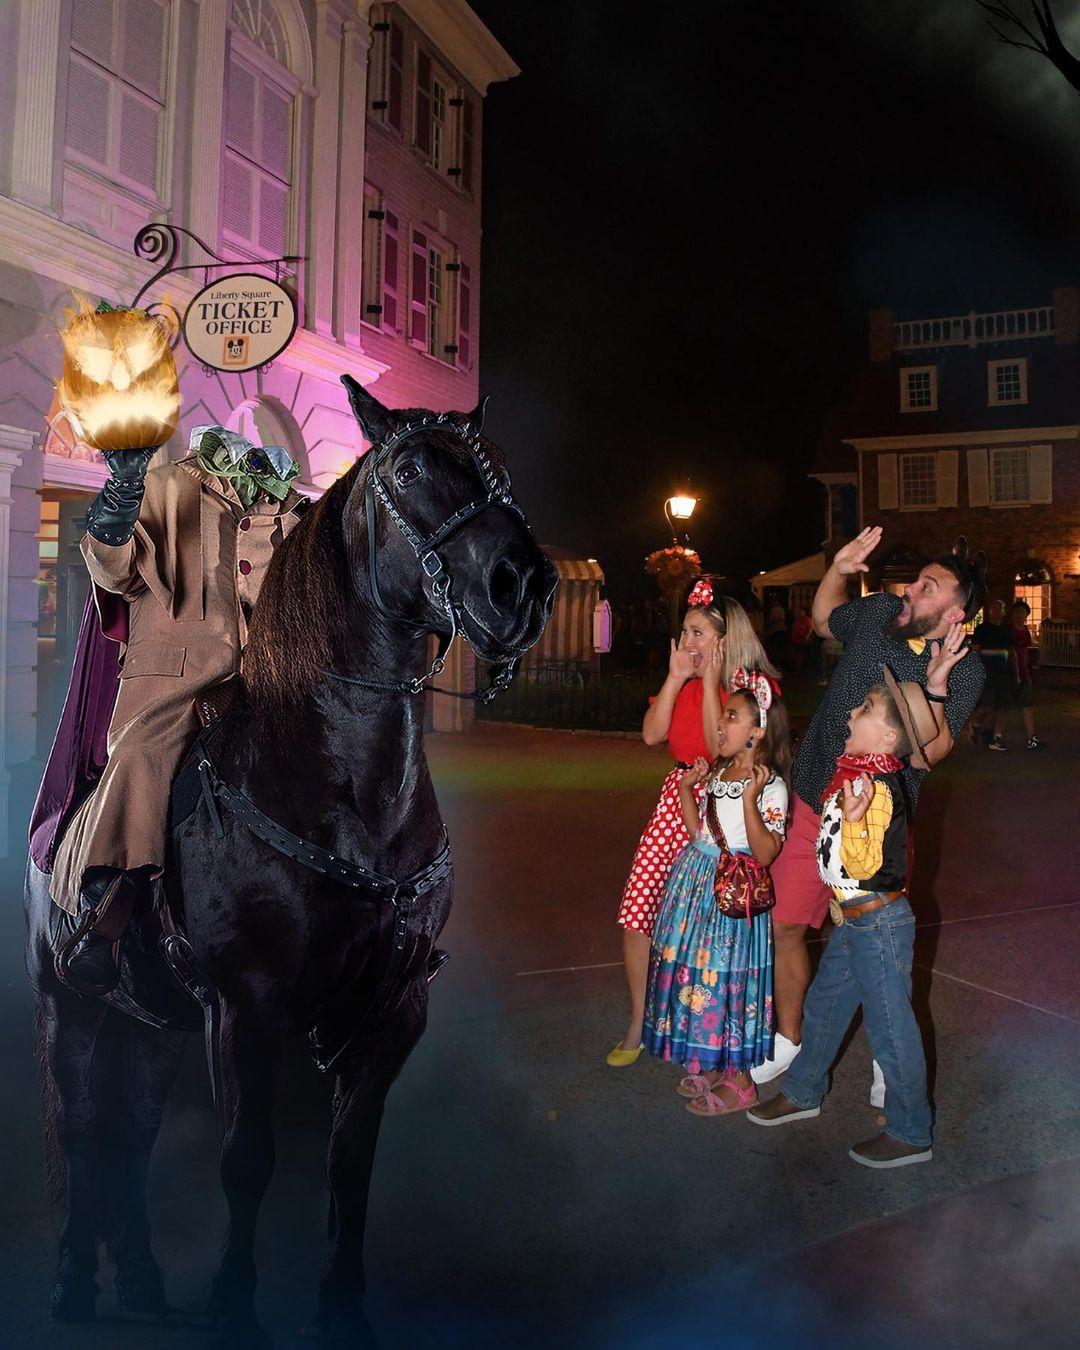 Entire Month Of August SOLD OUT For Disney World's Halloween Party